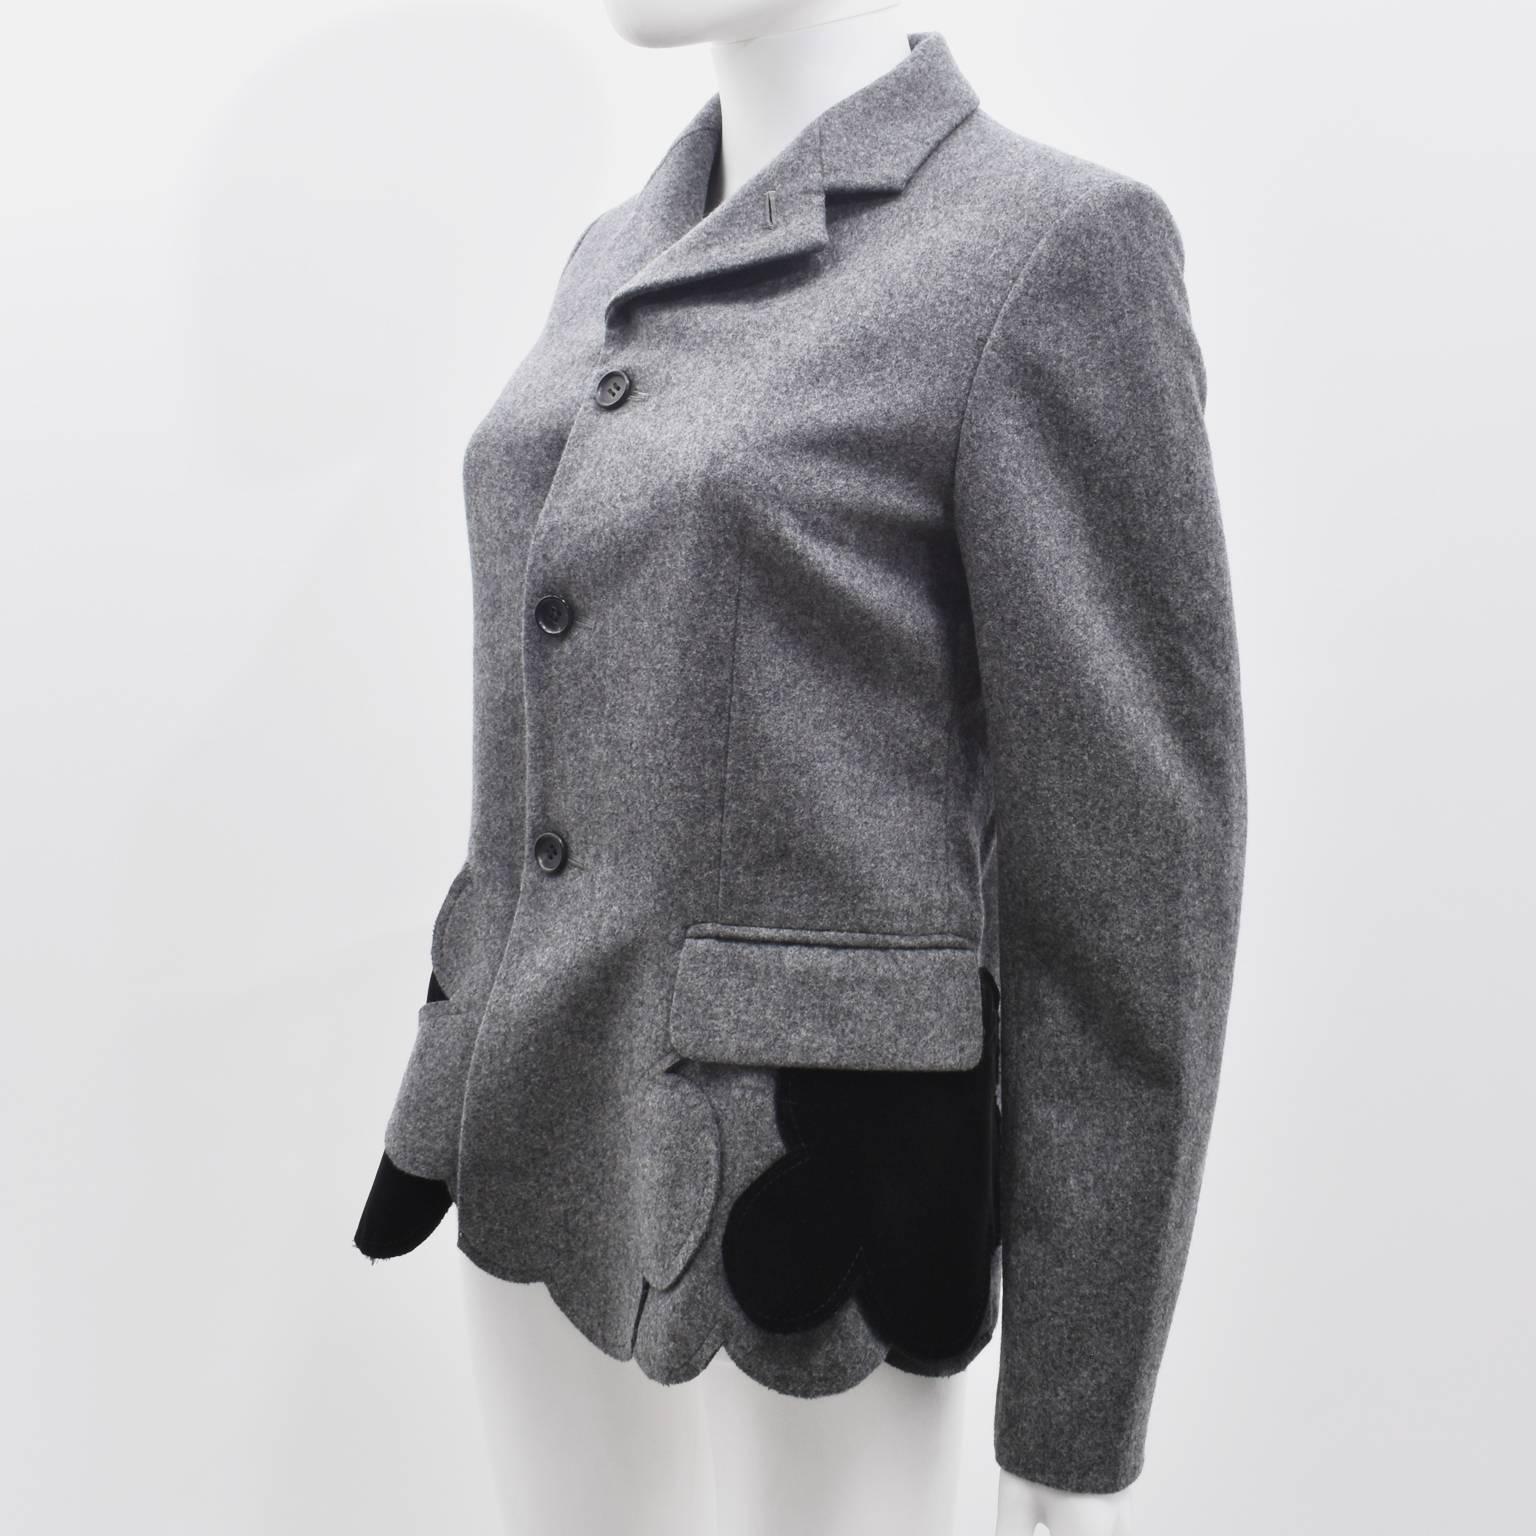 A grey wool blazer with velvet panel inserts from Comme des Garcons. The blazer has a straight cut with a notched collar, button down front and two pockets at the hip. In a Comme twist on a classic jacket, it has an irregular scalloped hem and